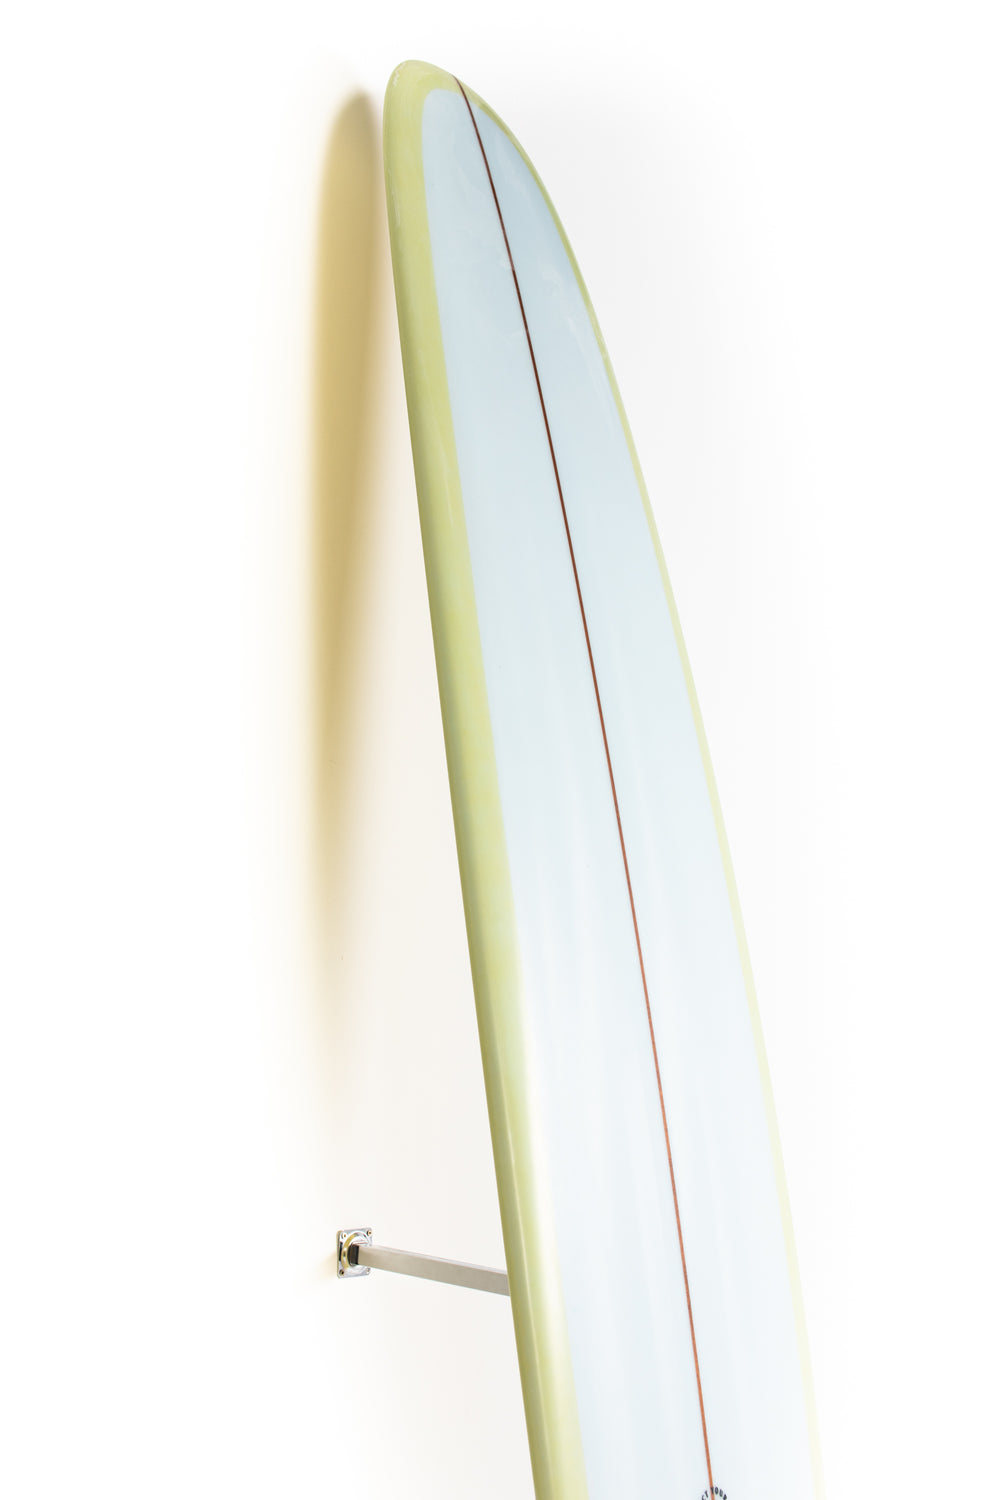 THOMAS SURFBOARDS THE WIZL 9'4 - サーフィン